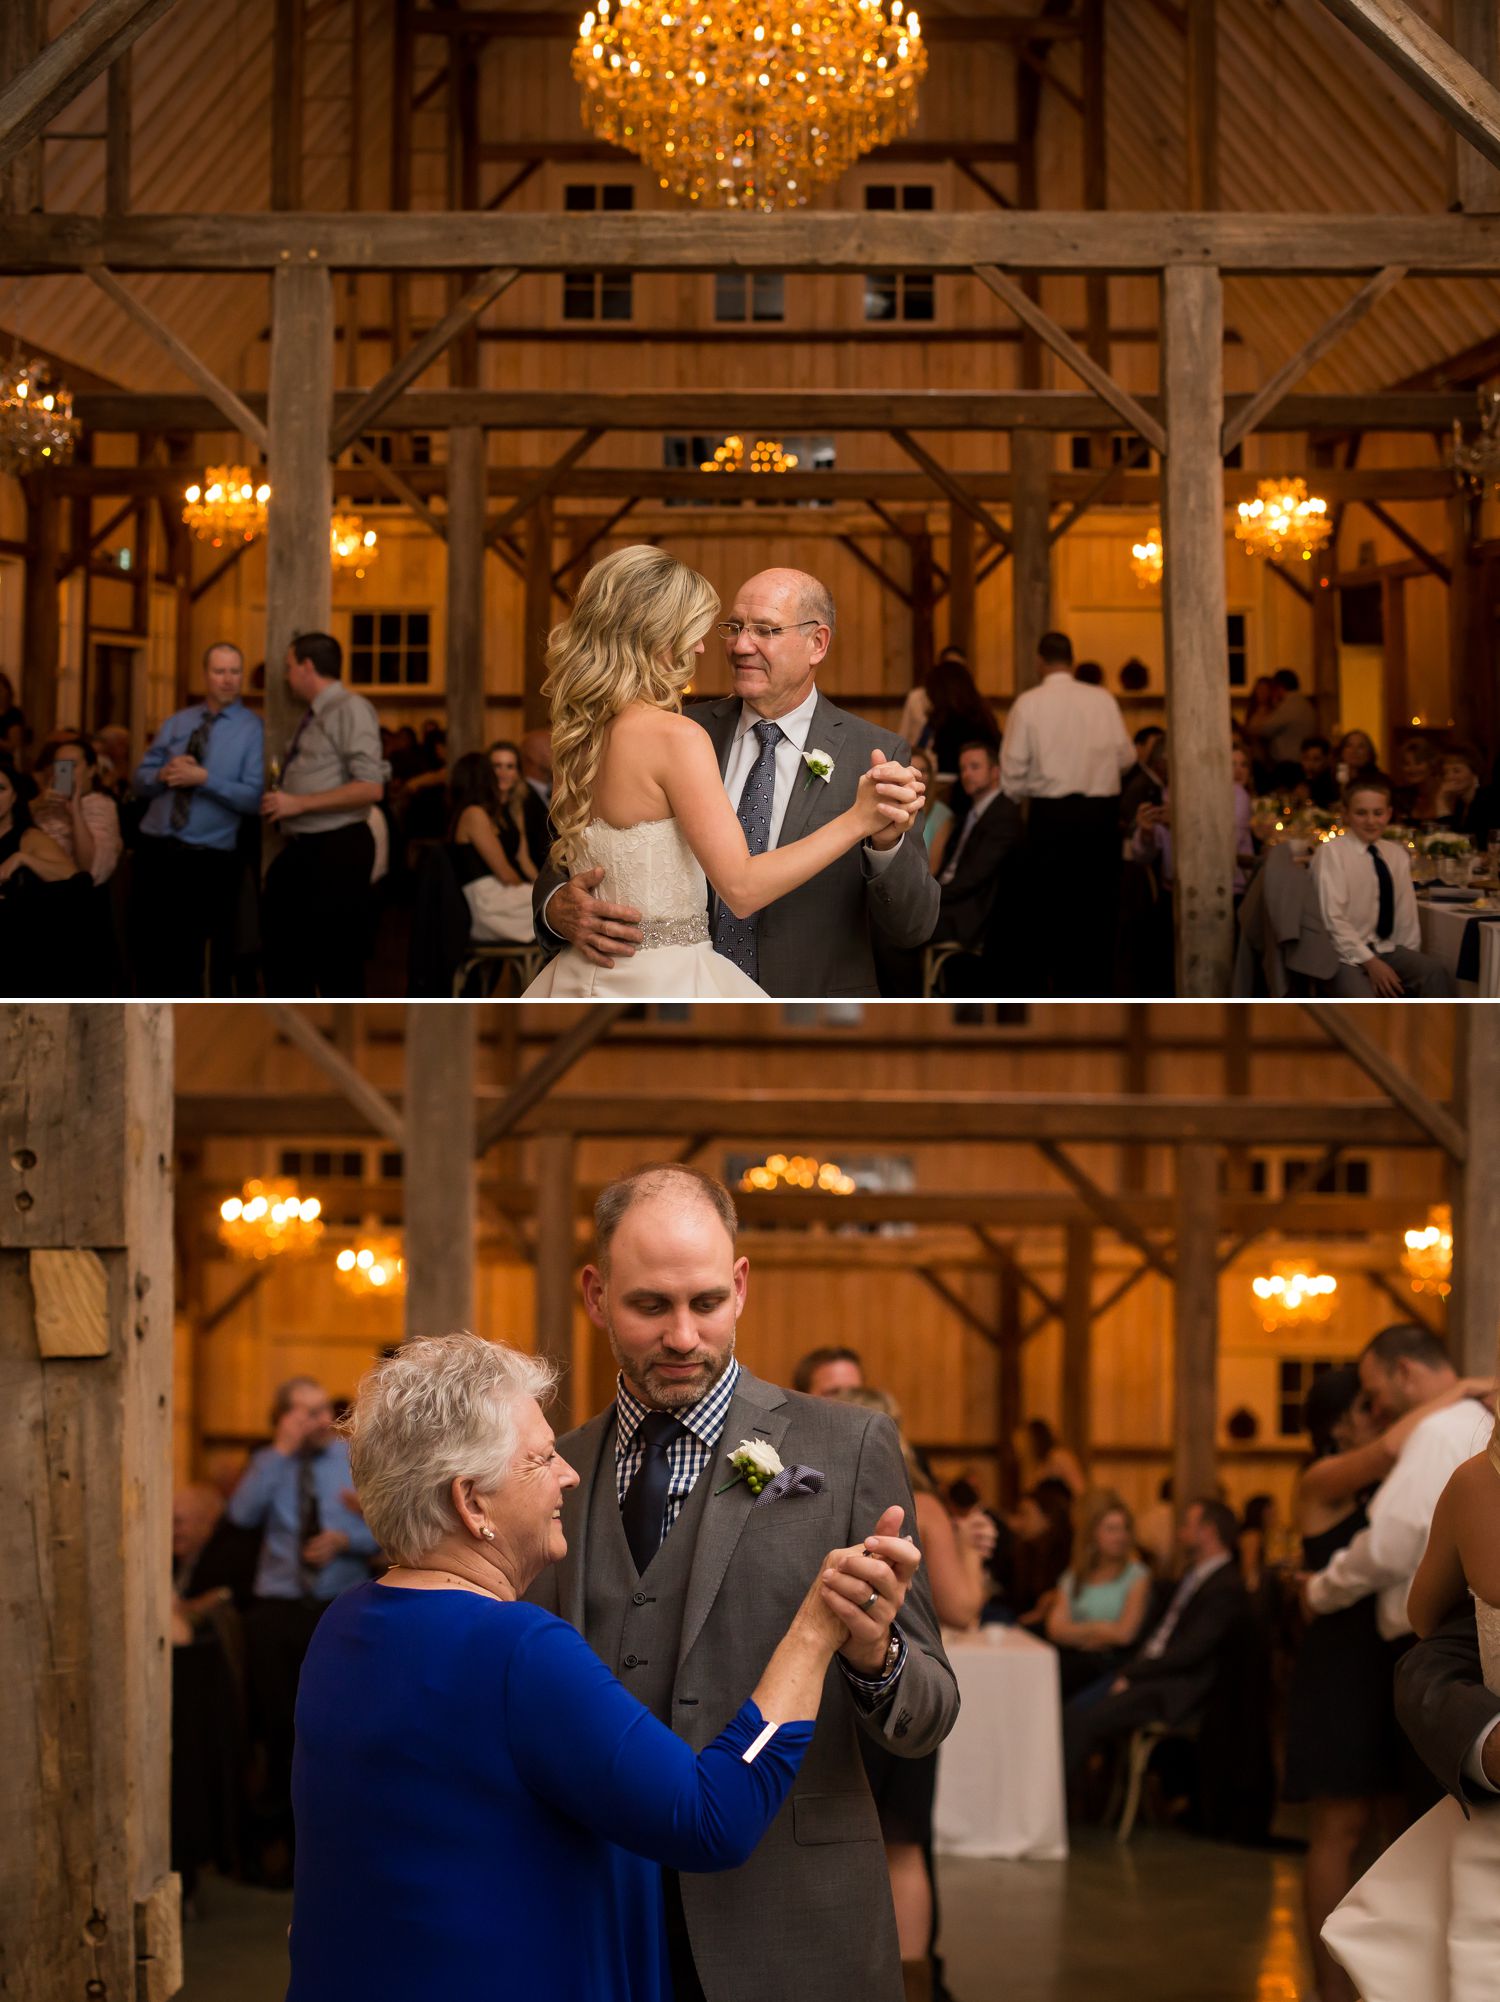 The bride and groom during their first dances with their parents at the Stonefields Wedding Reception